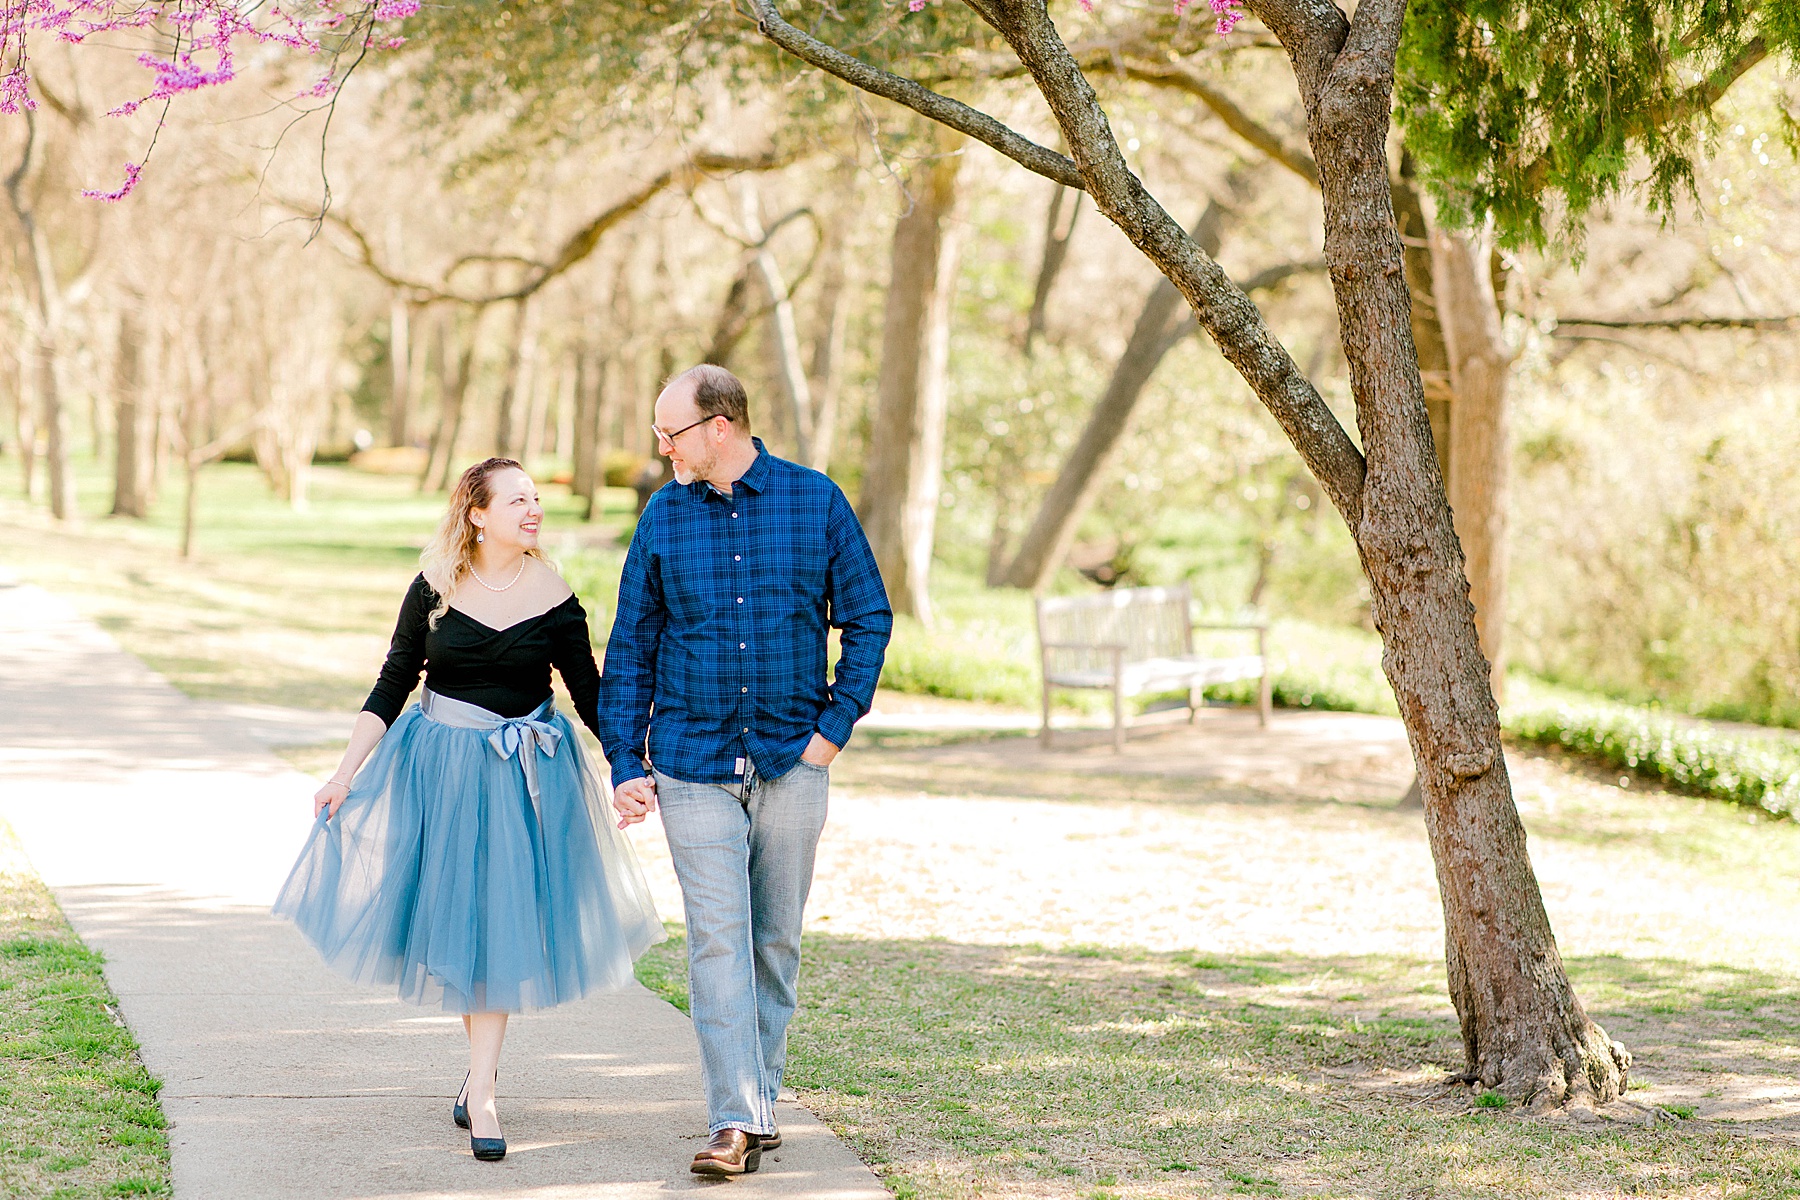 Bright and Bubbly Spring Engagement Session - Dallas, Texas